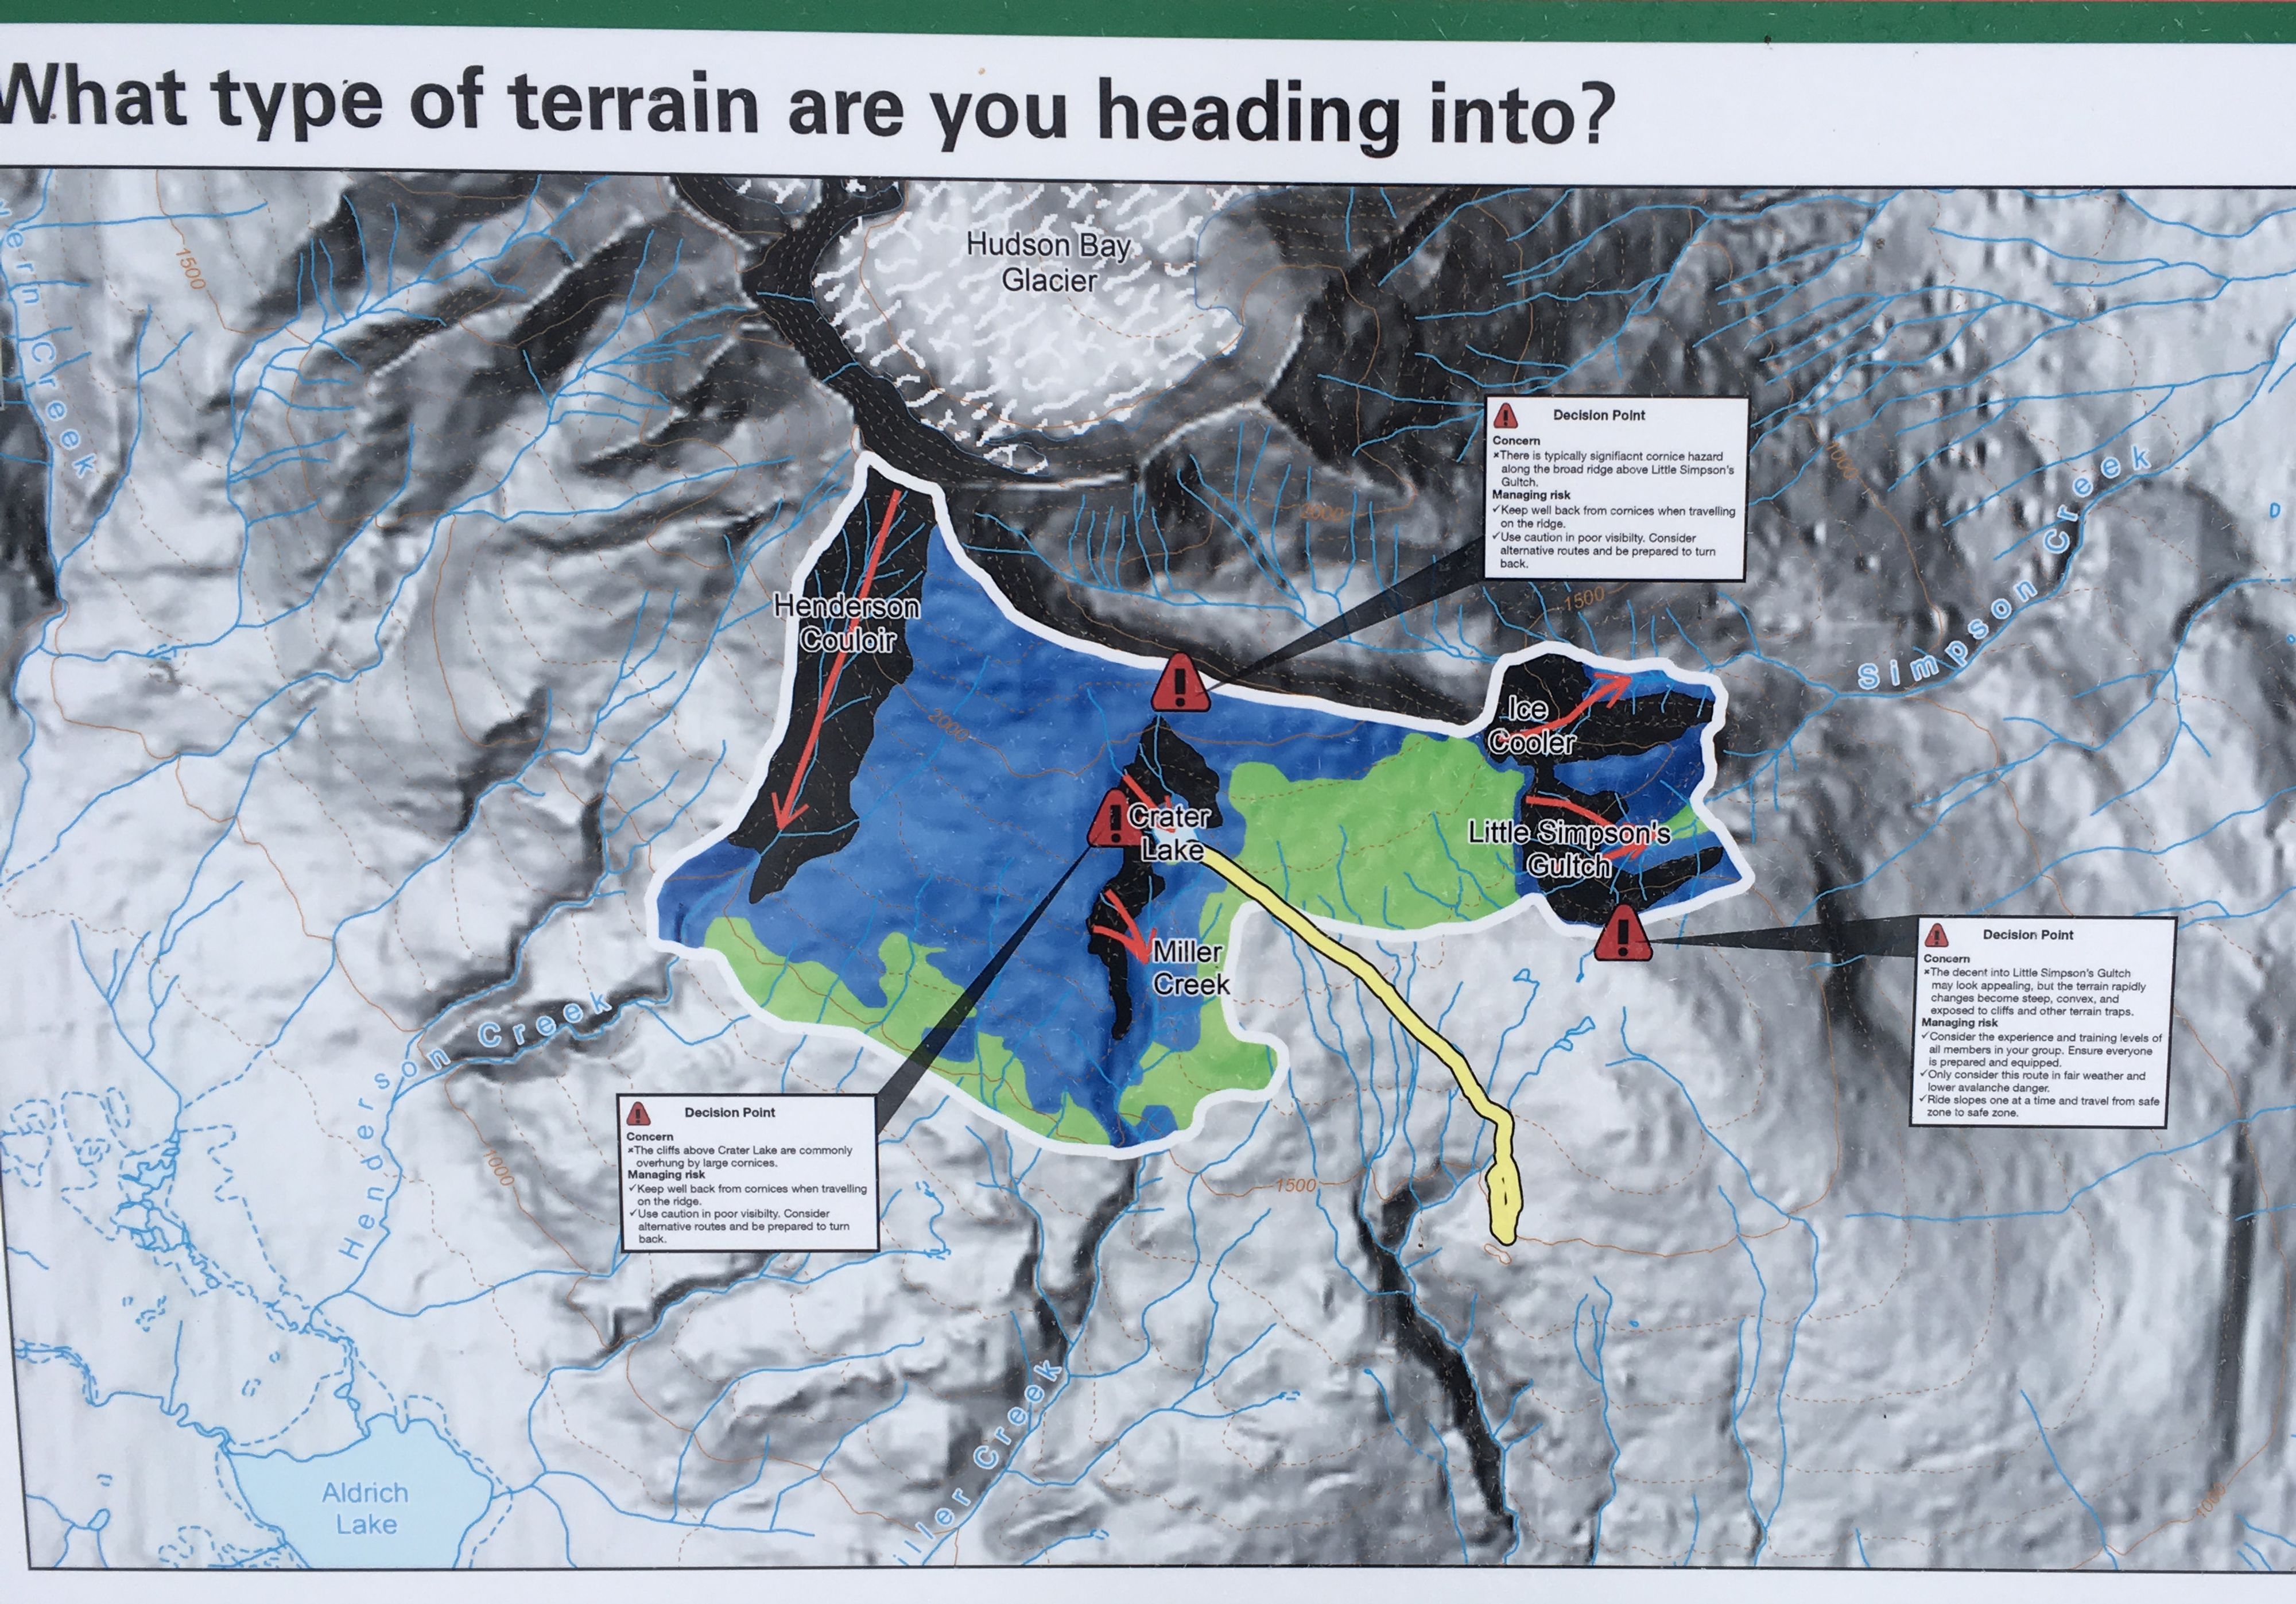 An ATES map shows simple, challenging, and complex terrain, as well as marking major avalanche paths, trails, and key decision points.